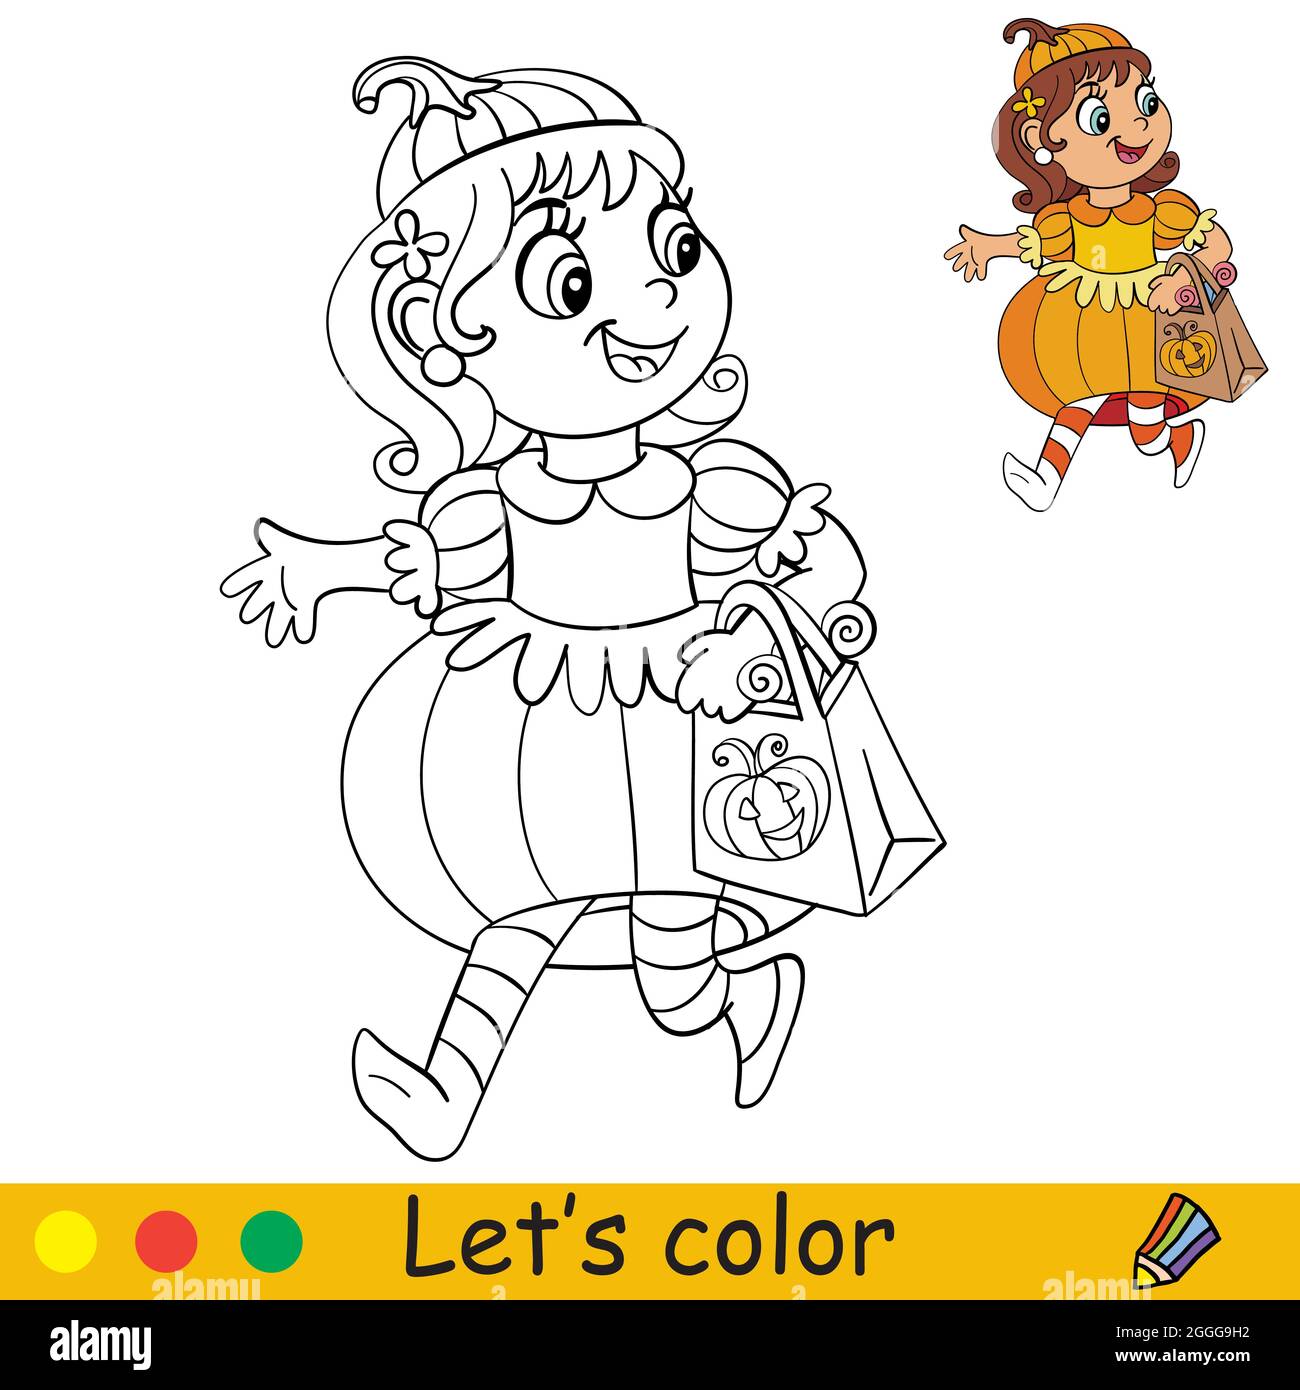 https://c8.alamy.com/comp/2GGG9H2/funny-girl-in-pumpkin-costume-halloween-concept-coloring-book-page-for-children-with-colorful-template-vector-cartoon-illustration-for-print-pres-2GGG9H2.jpg